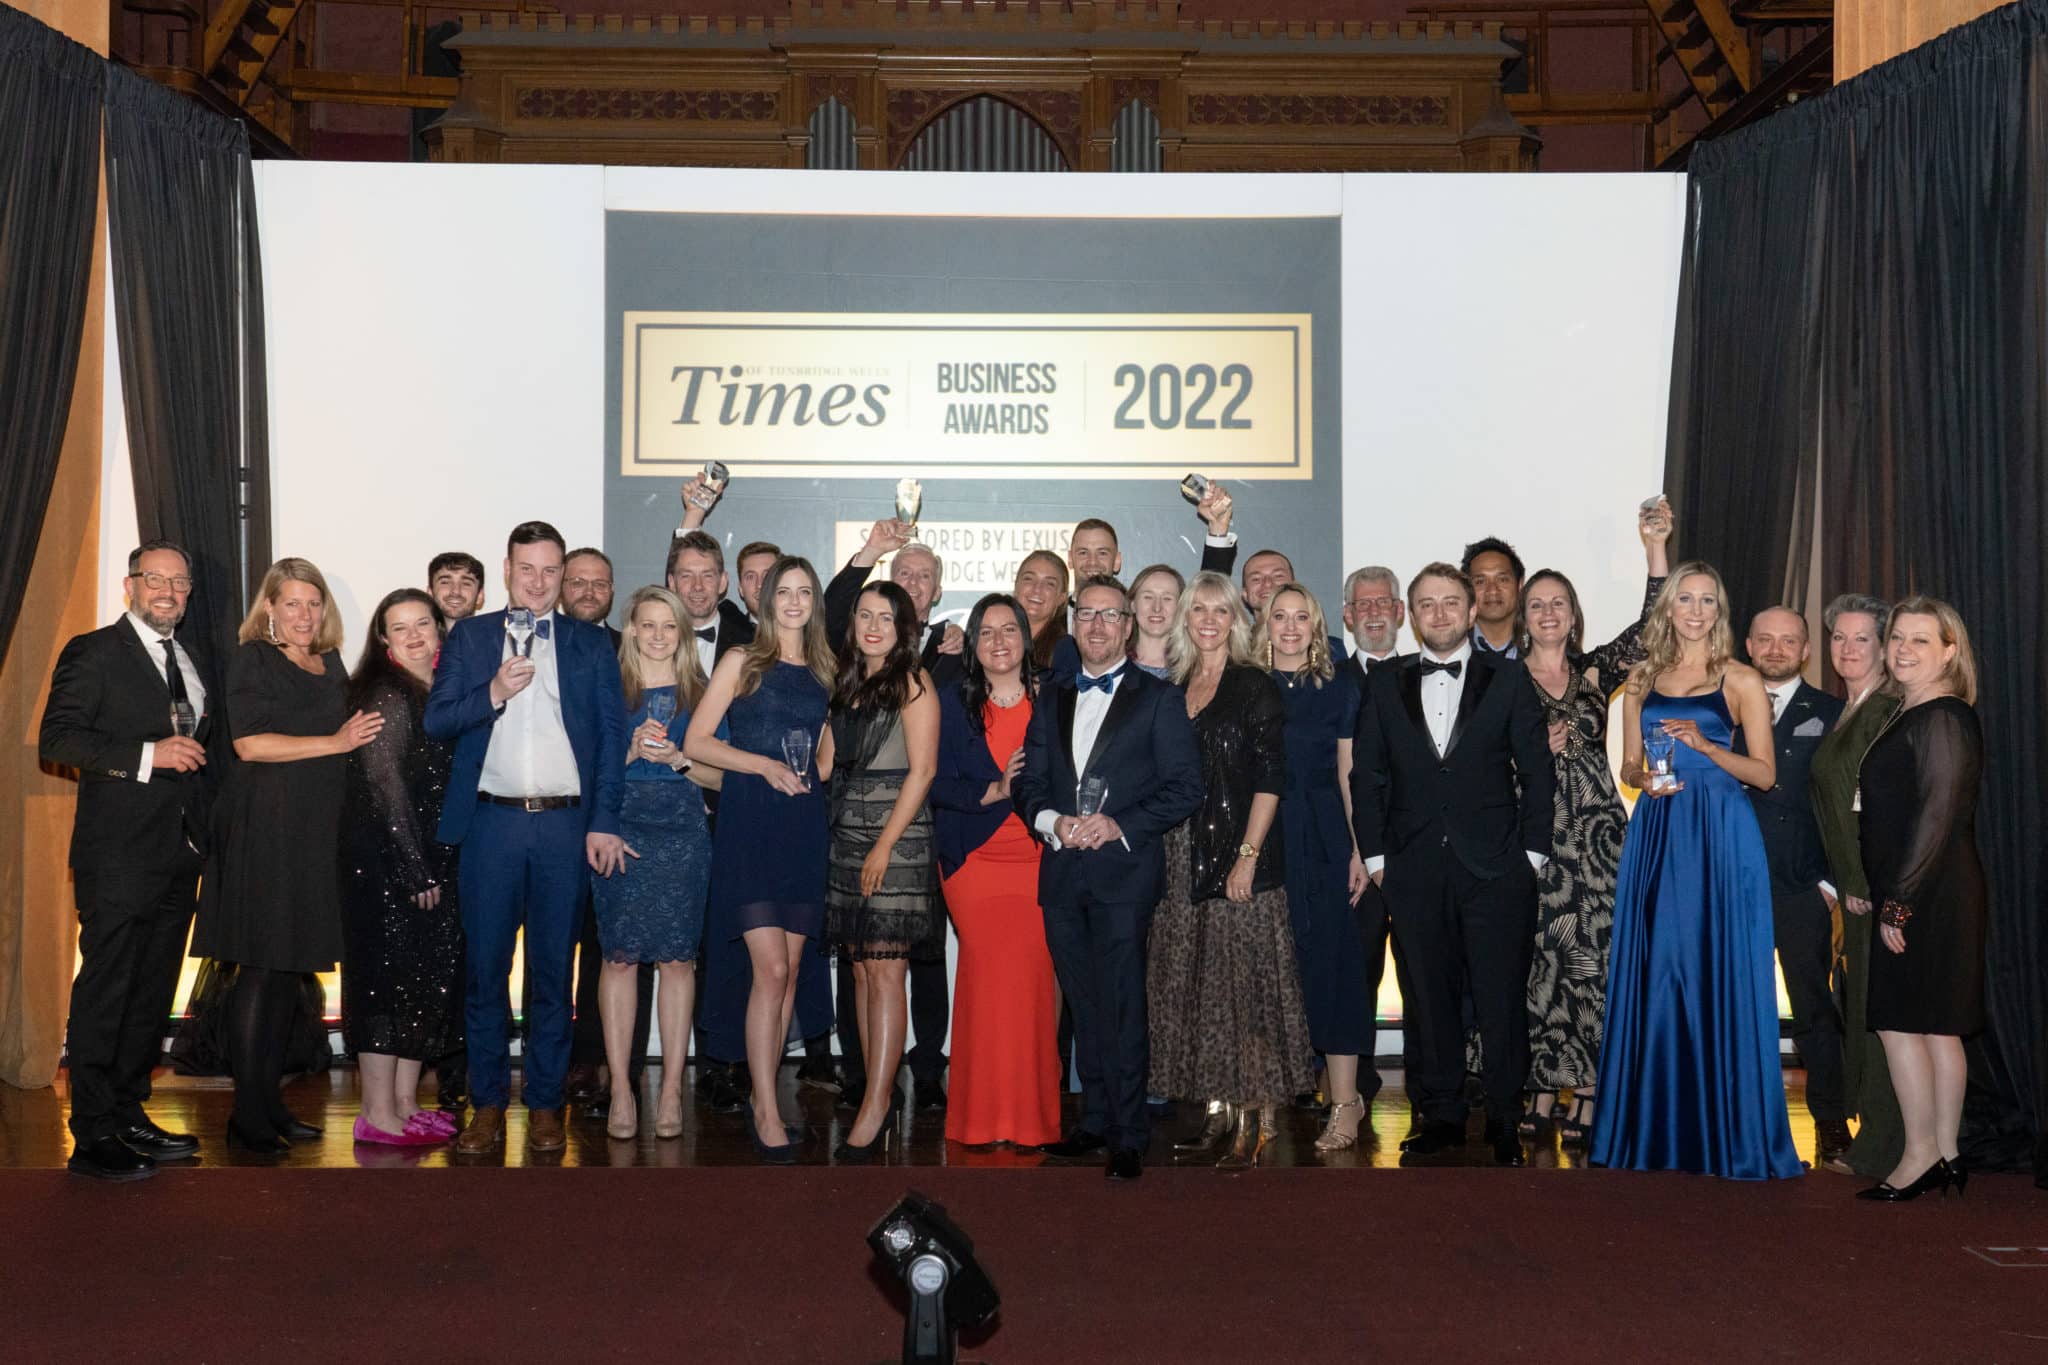 Attendees of the ToTW Business Awards 2022